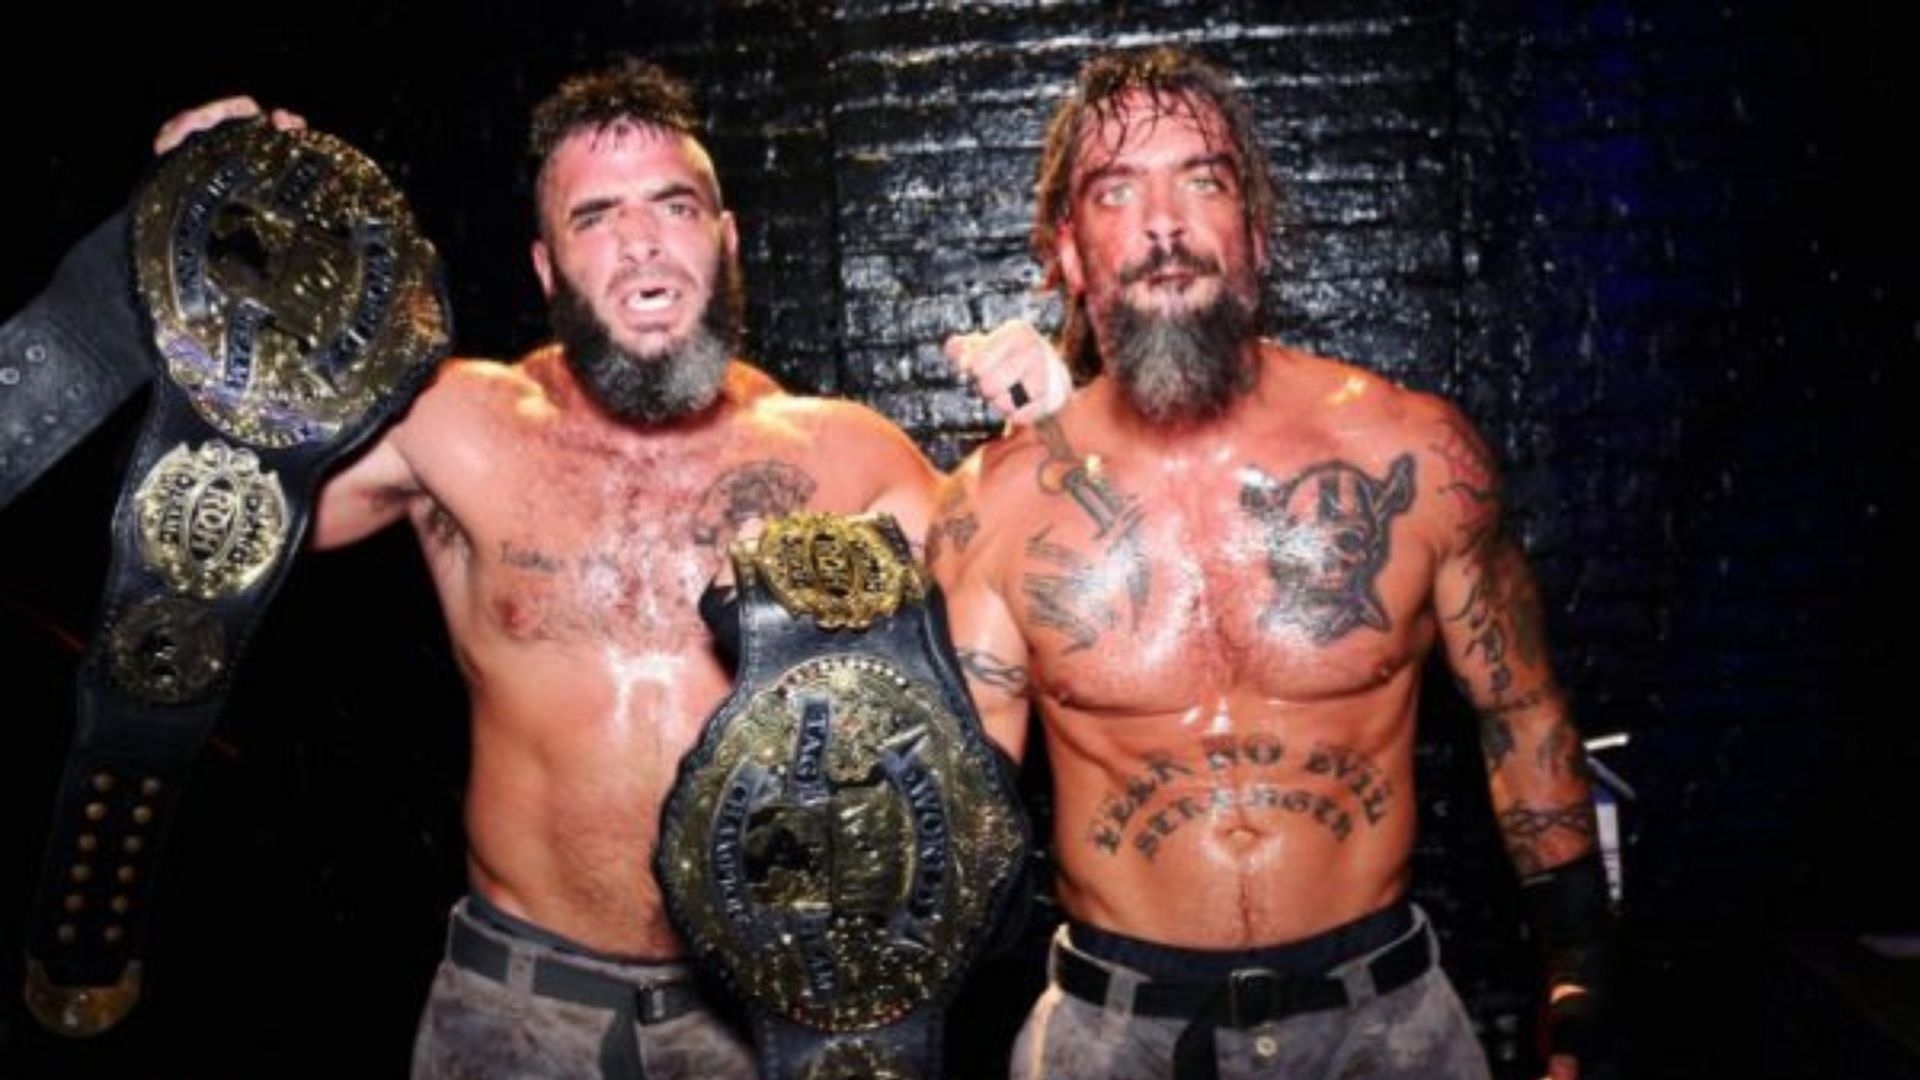 The Briscoe Brothers are record 13-time ROH World Tag Team Champions